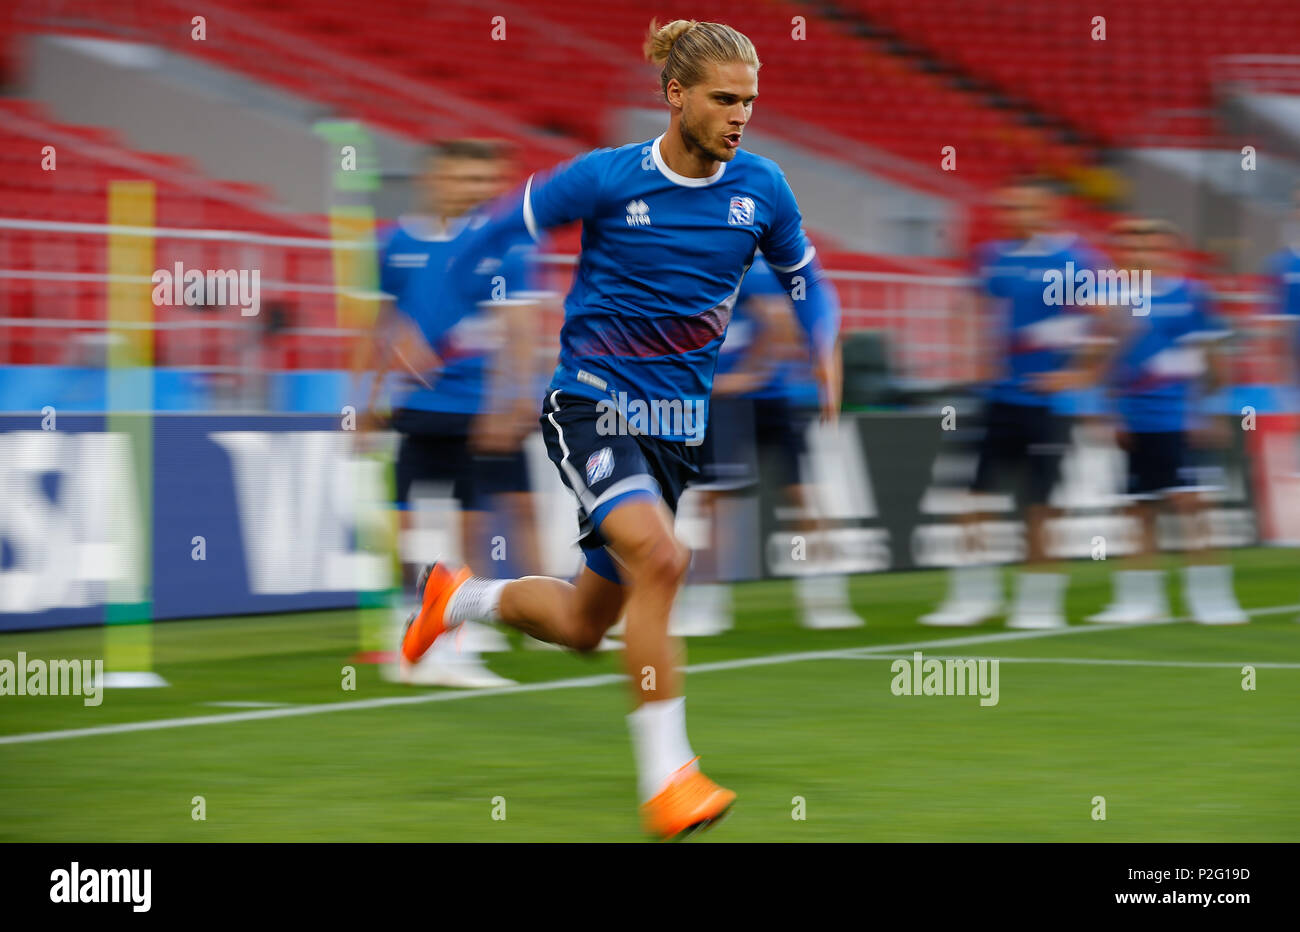 MOSCOU, MO - 15.06.2018: ARGENTINA VS ICELAND - Rúrik Gíslason during official training before departure Argentina vs Iceland valid for the first round of Group D of the 2018 World Cup, held at the Otkrytie Arena in Moscow, Russia. (Photo: Marcelo Machado de Melo/Fotoarena) Credit: Foto Arena LTDA/Alamy Live News Stock Photo